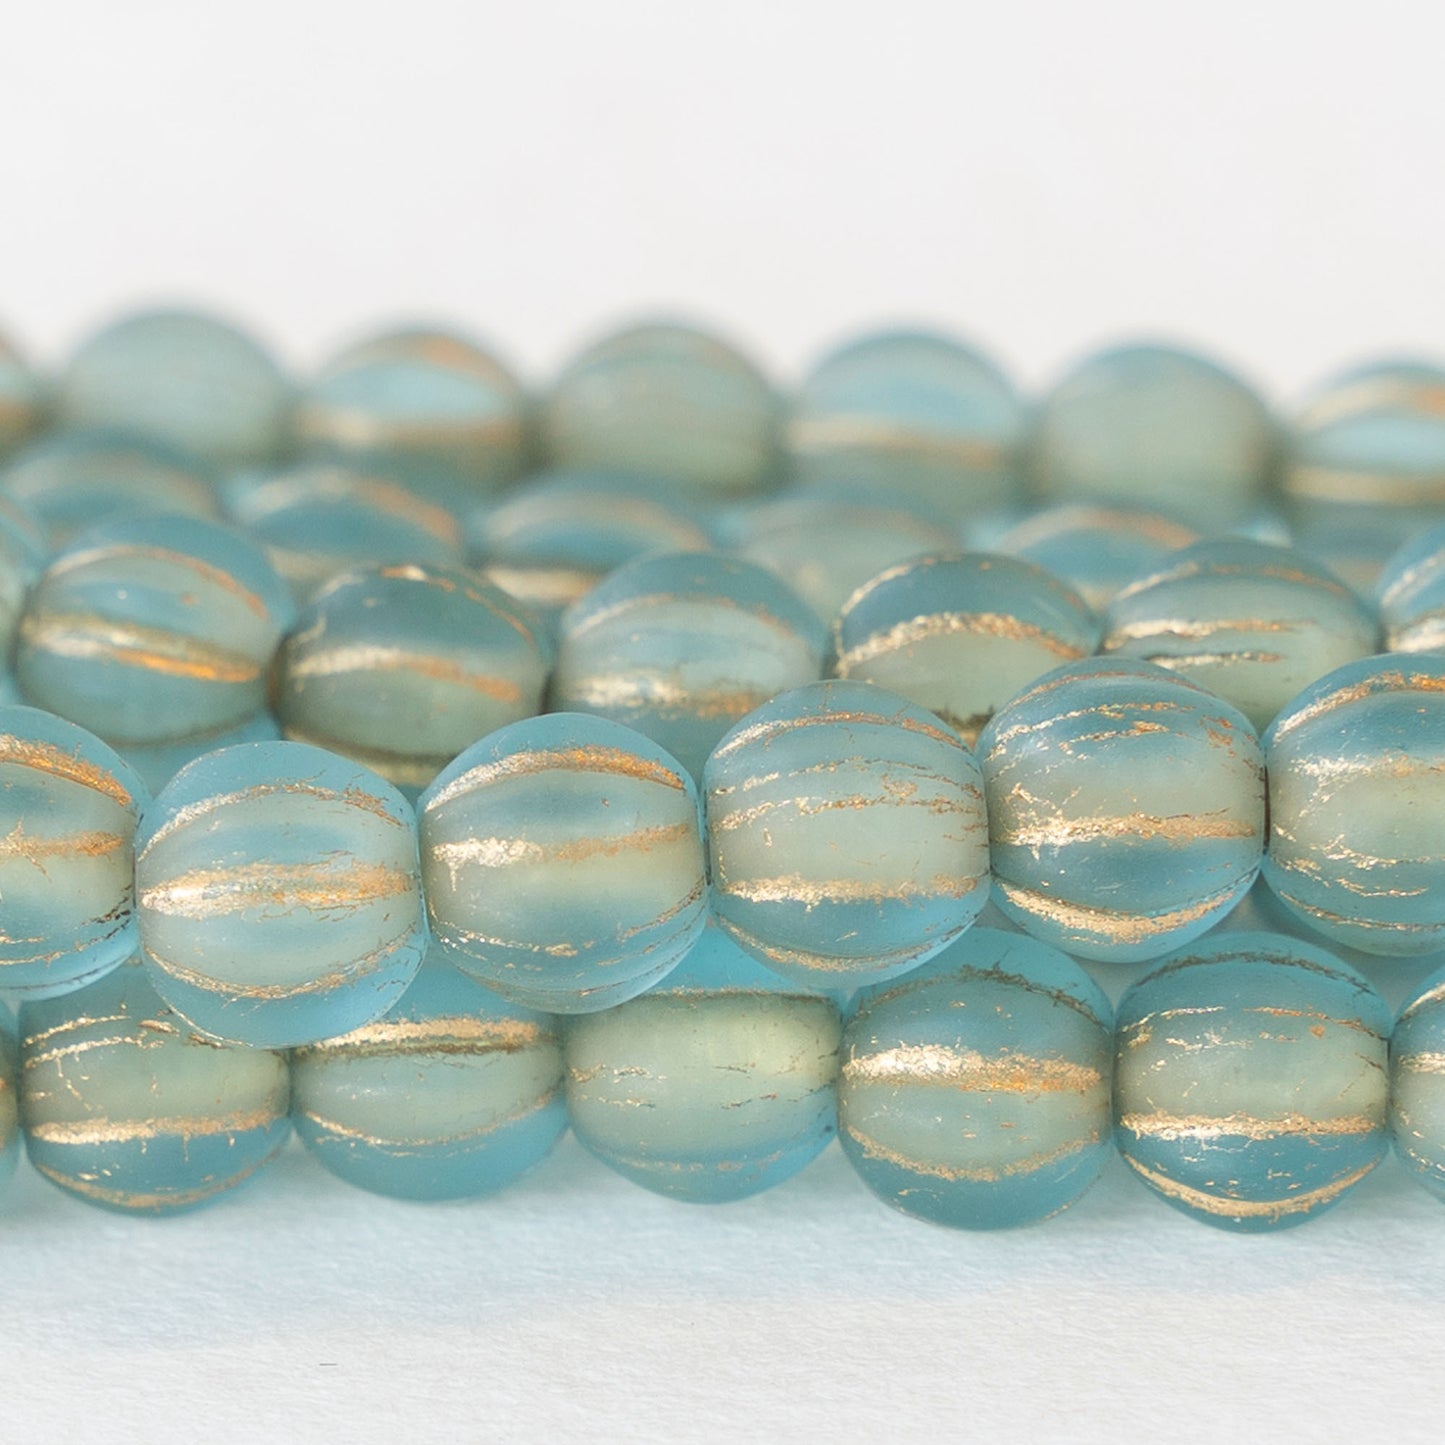 Load image into Gallery viewer, 6mm Melon Beads - Large Hole - Seafoam with Gold Wash - 50 Beads
